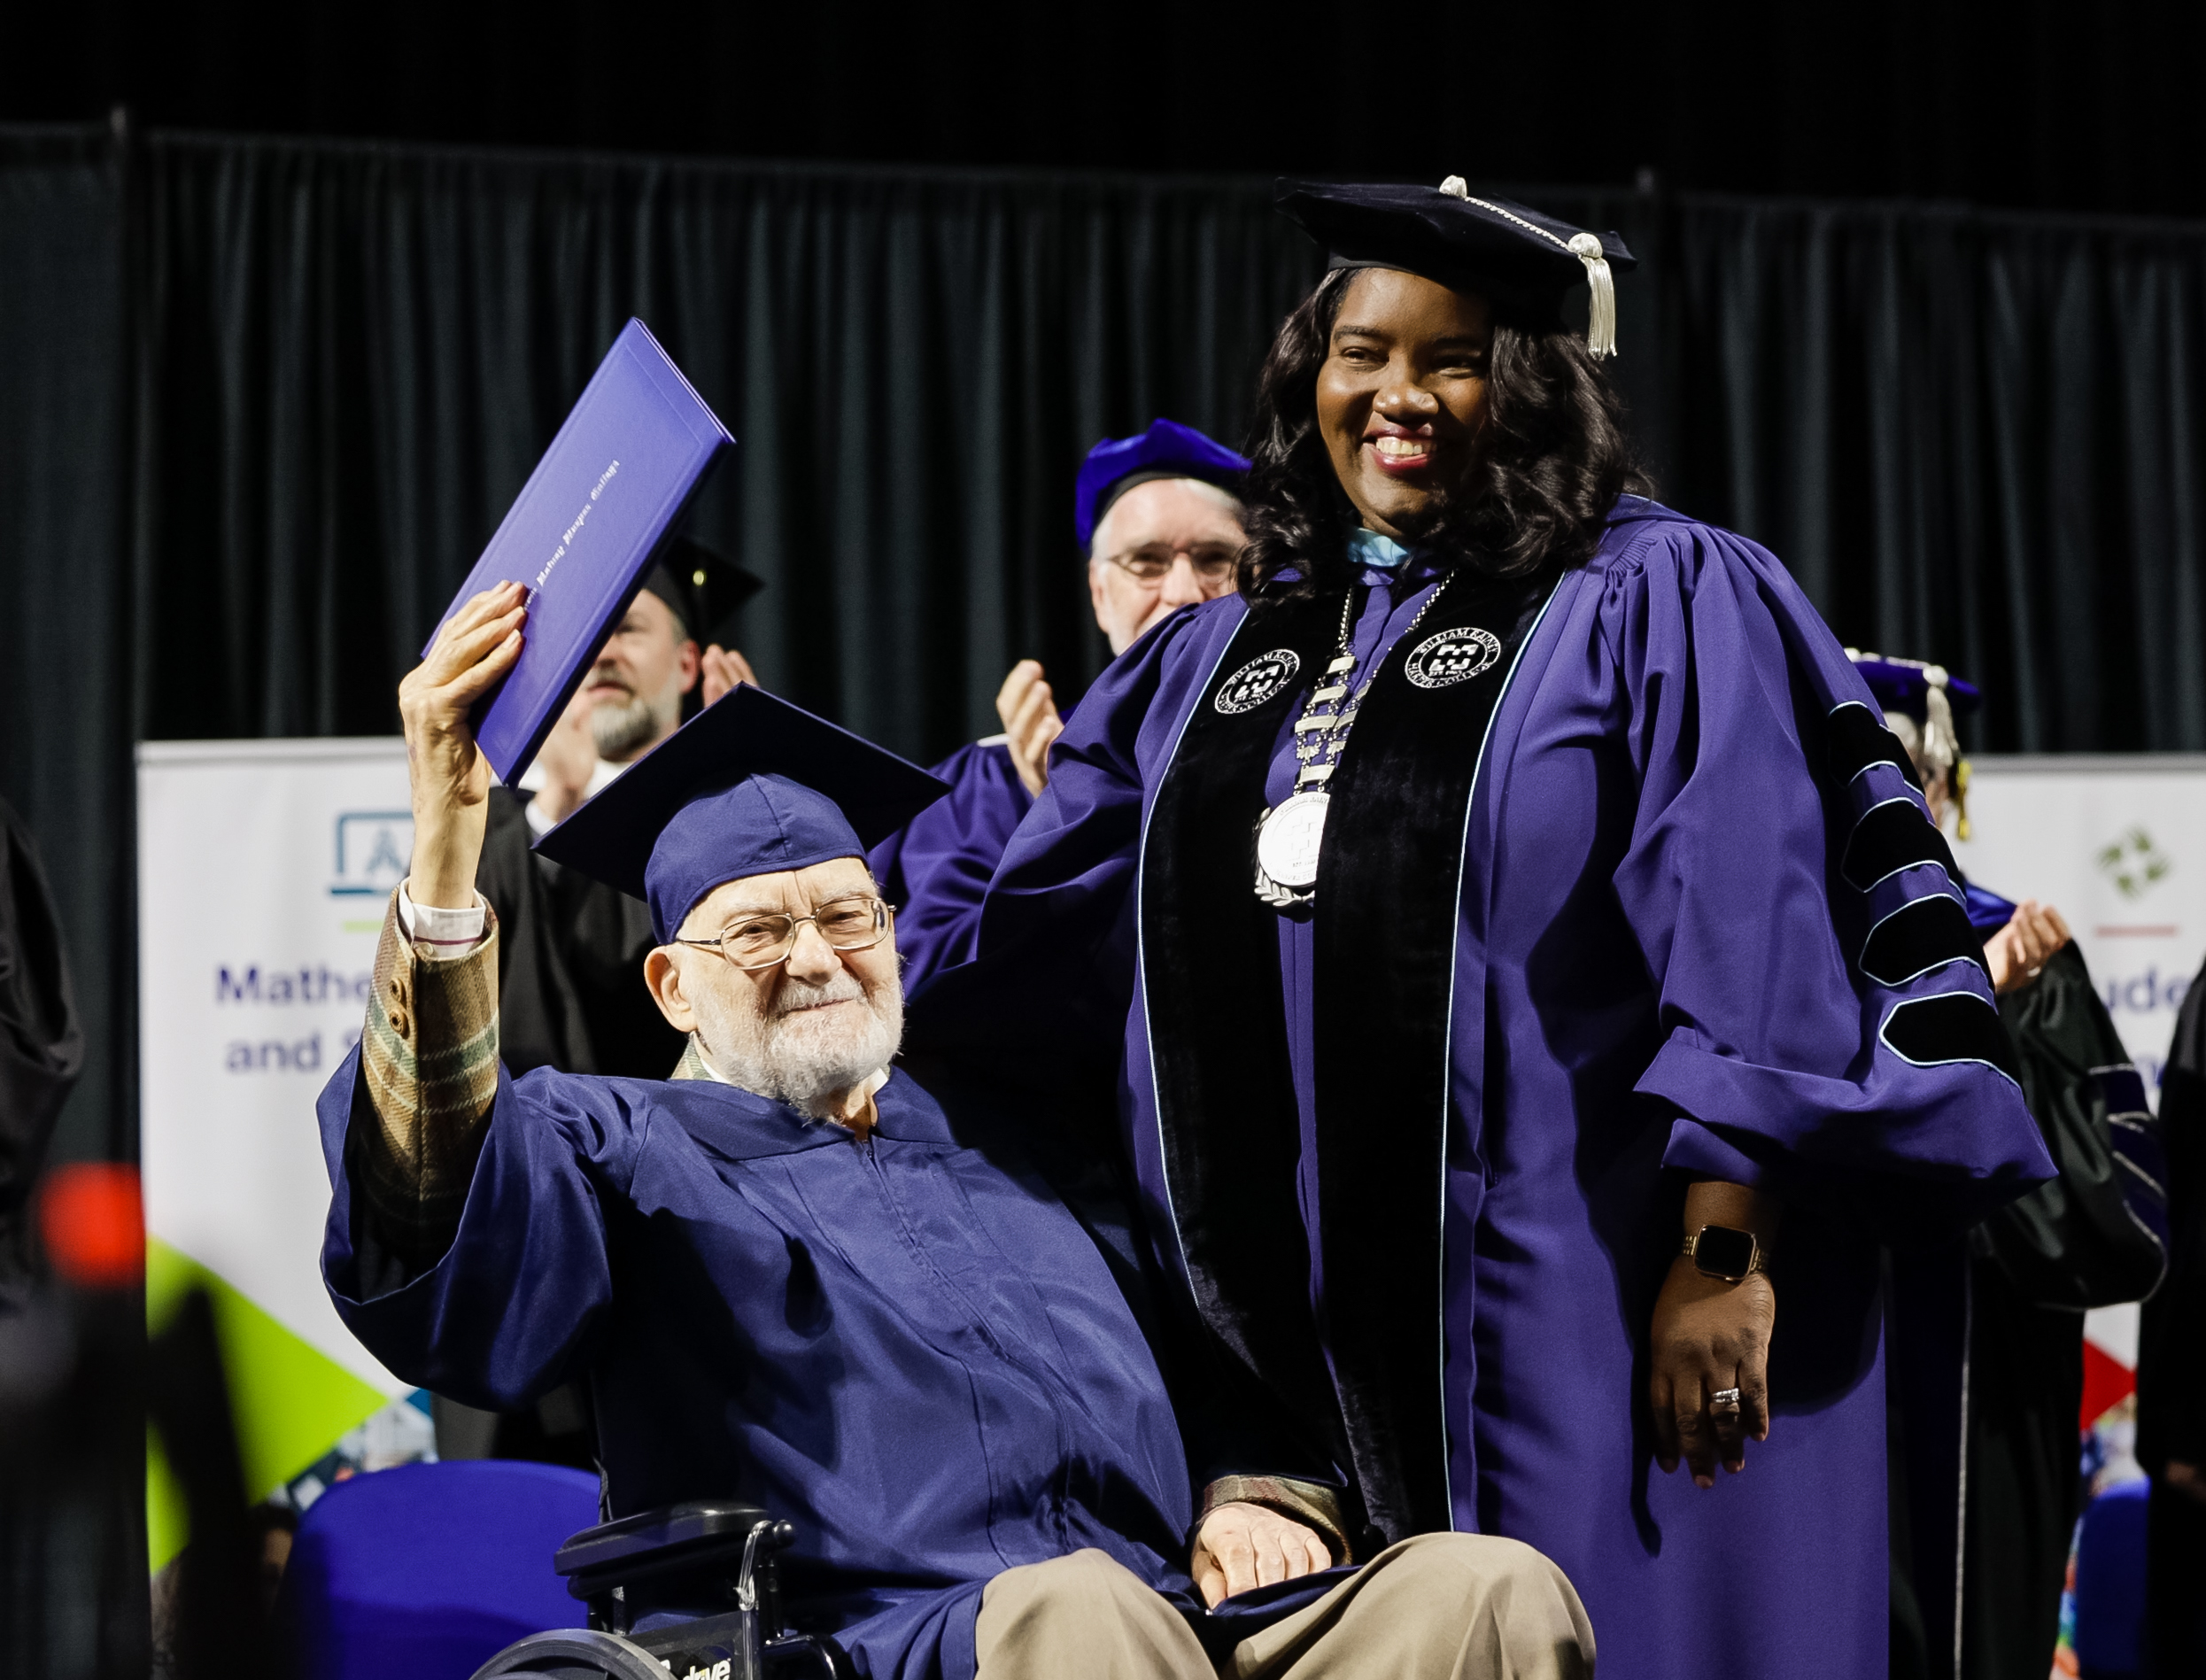 Dr. Proctor presents Bernie Bluestein with an honorary degree